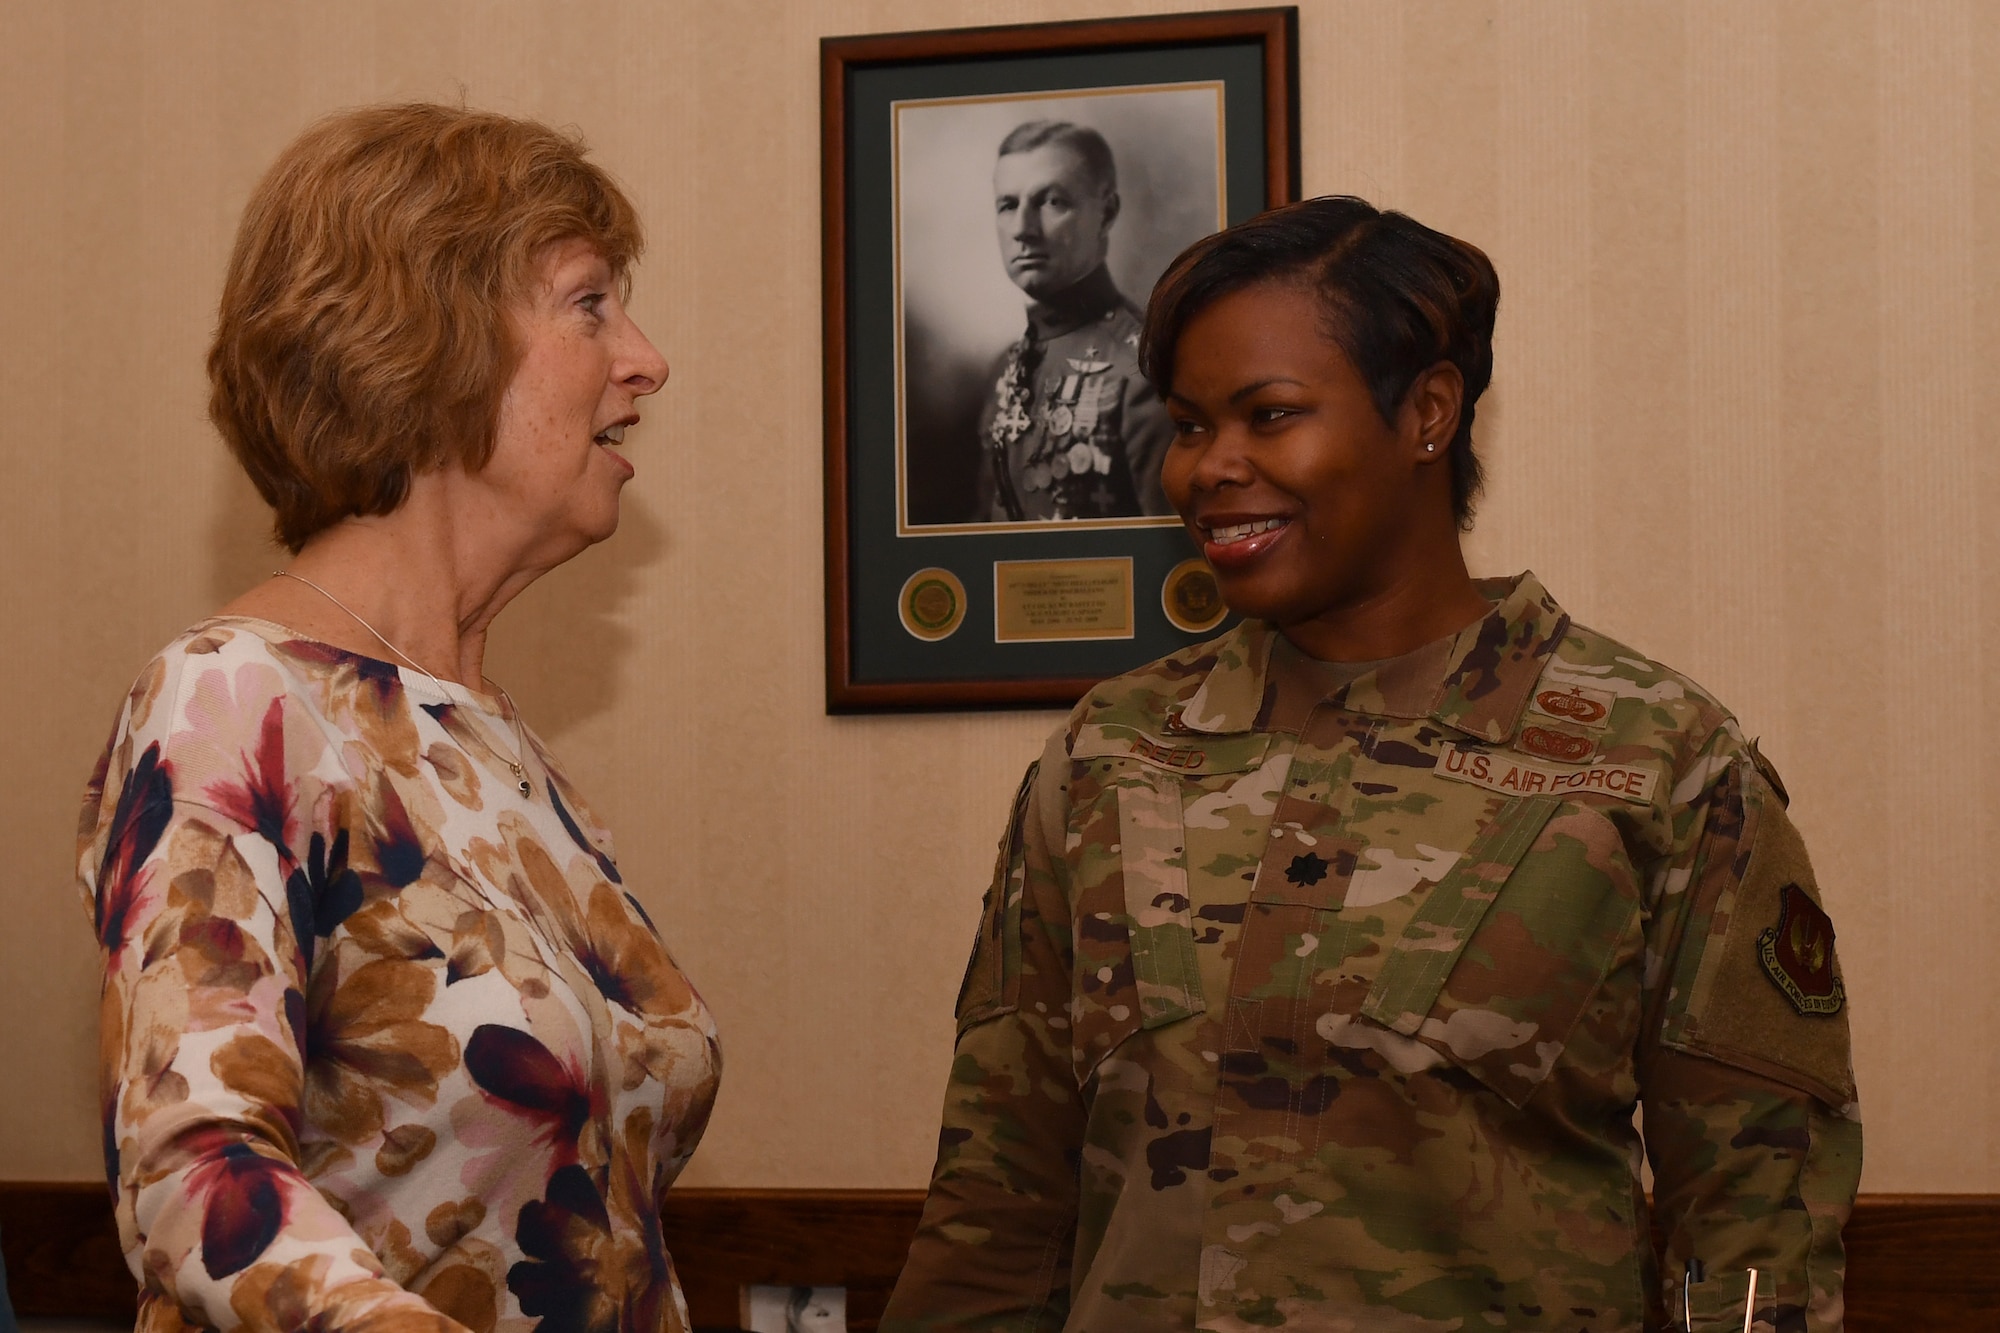 U.S. Air Force Lt. Col. Natosha Reed, 86th Force Support Squadron commander, meets with Laura Hyten, wife of Gen. John E. Hyten, Vice Chairman of the Joint Chiefs of Staff, at a Key Spouse luncheon in the Officer’s Club at Ramstein Air Base, Germany, Feb. 5, 2020.